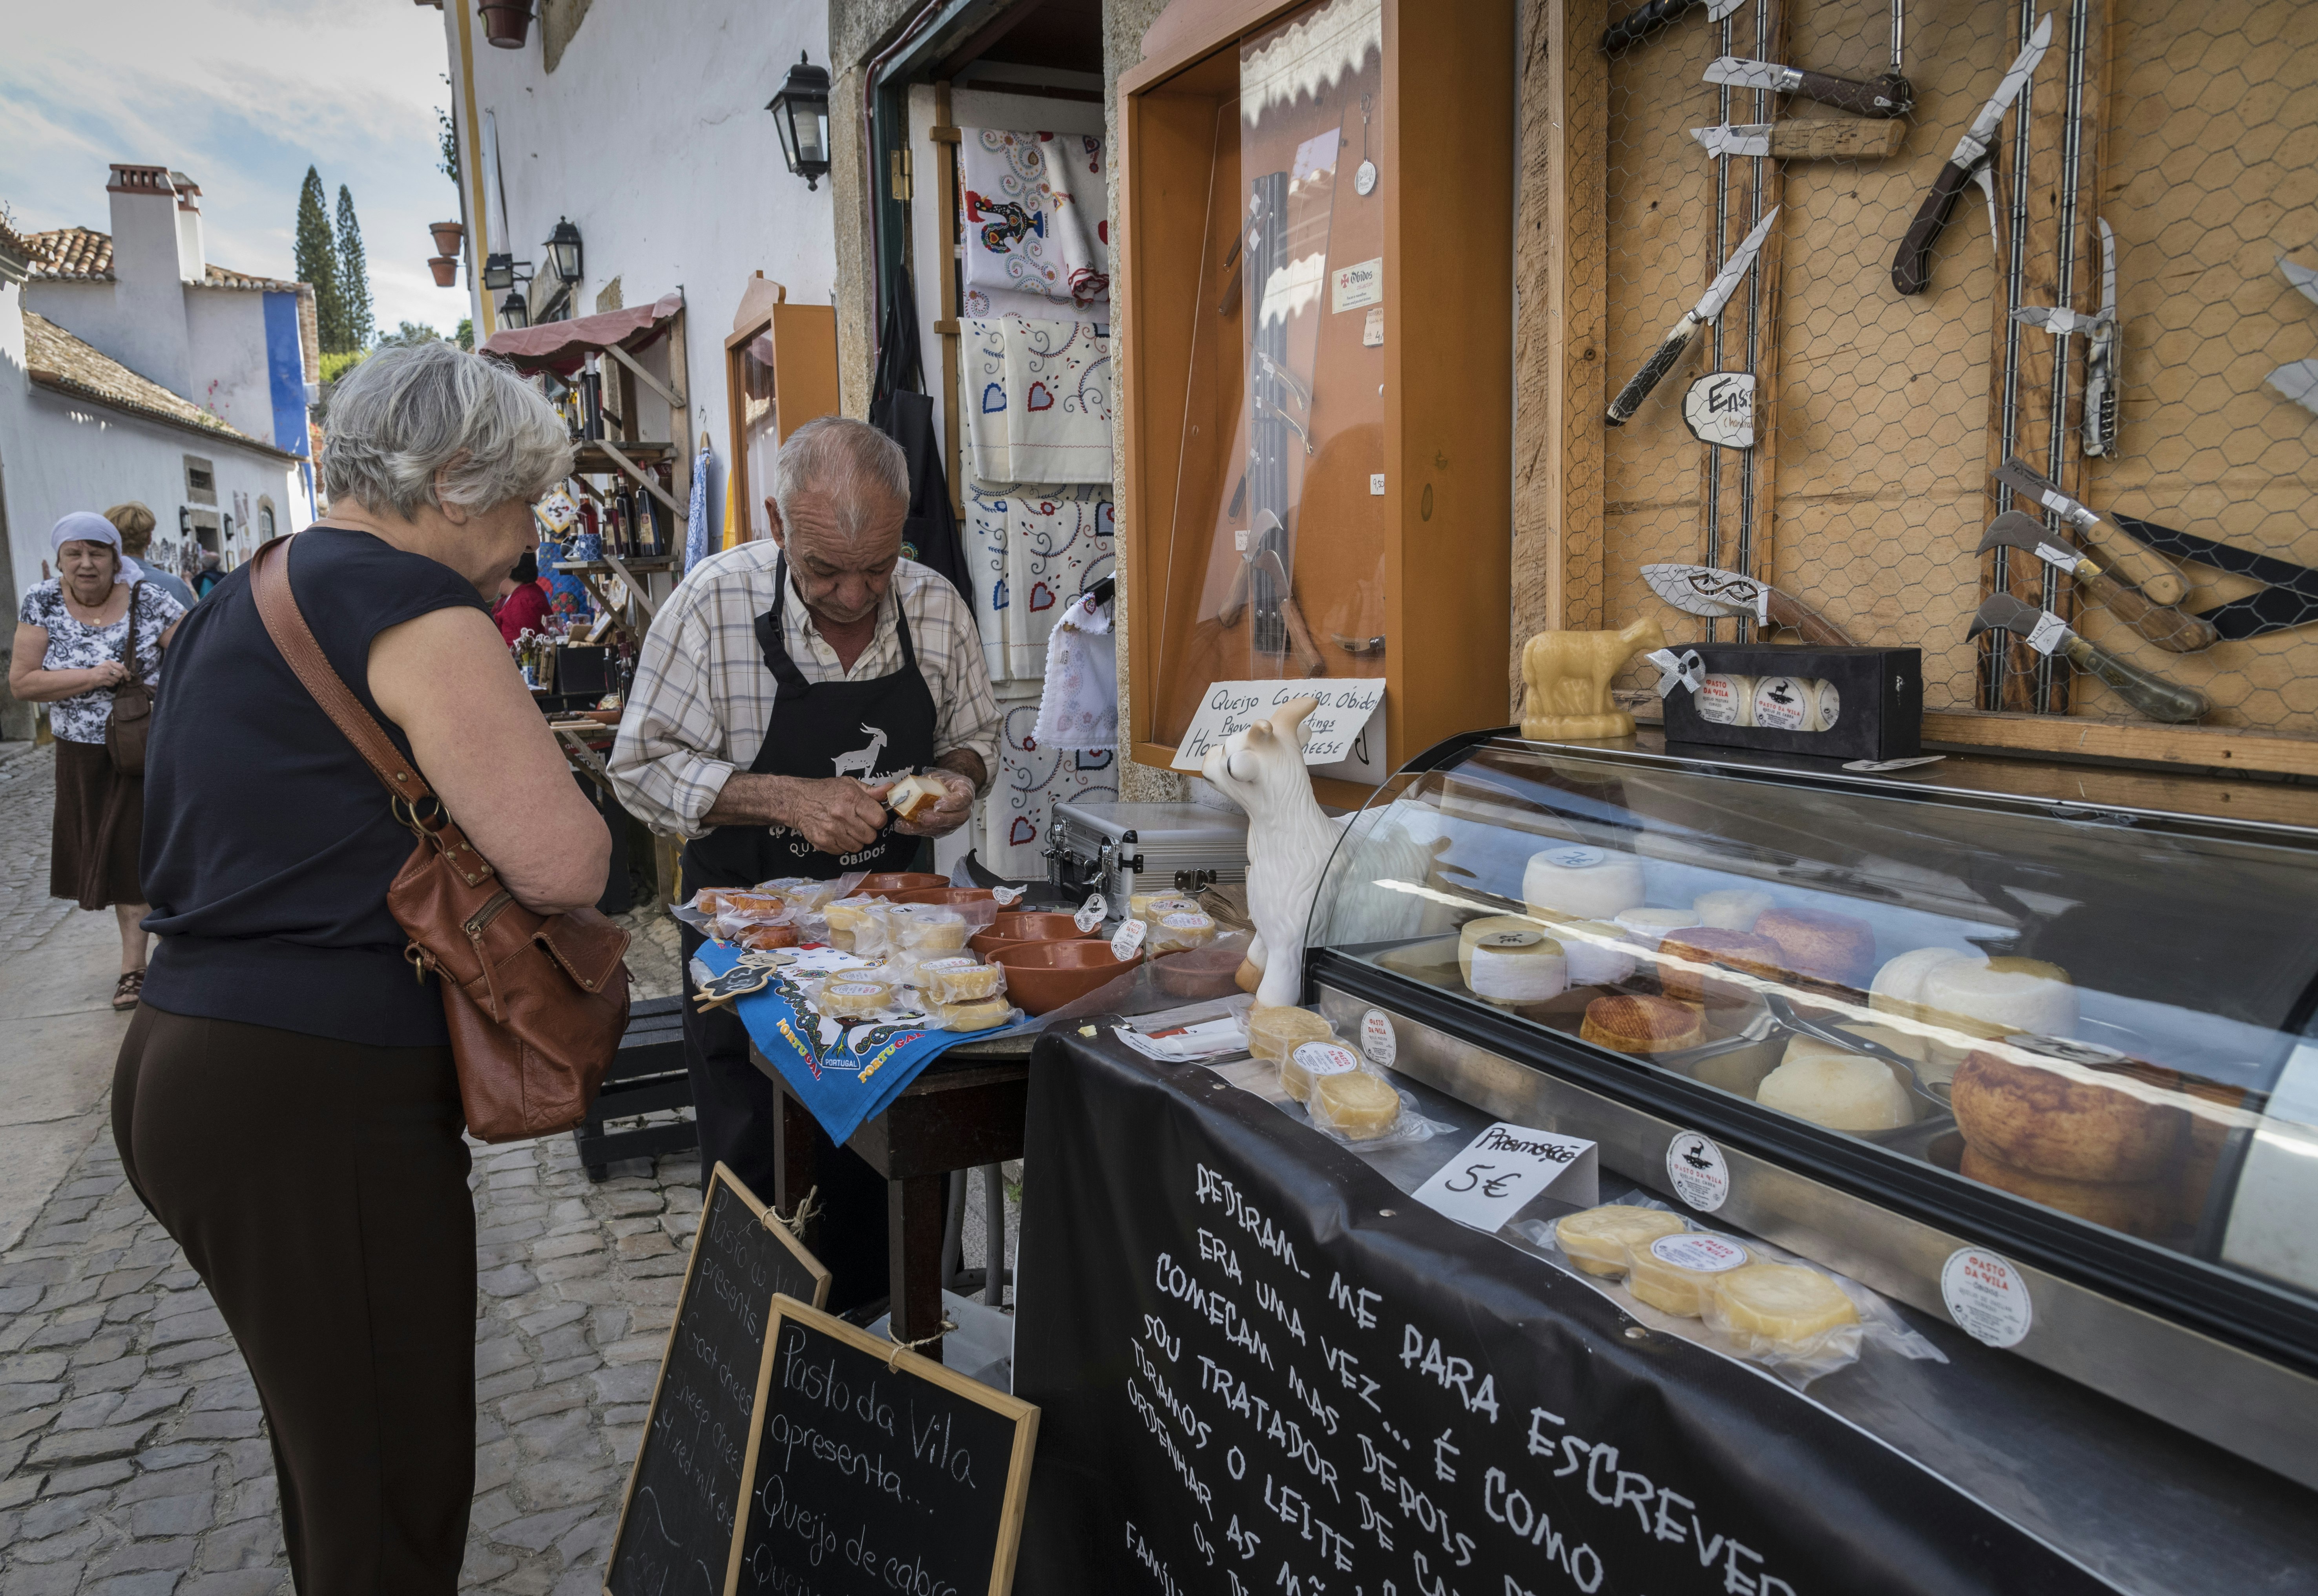 A shopkeeper is slicing a piece of cheese for a customer to taste from a stall outside a shop. Many different types of cheese are on display and an array of culinary knives adorn the wall above a glass cabinet.